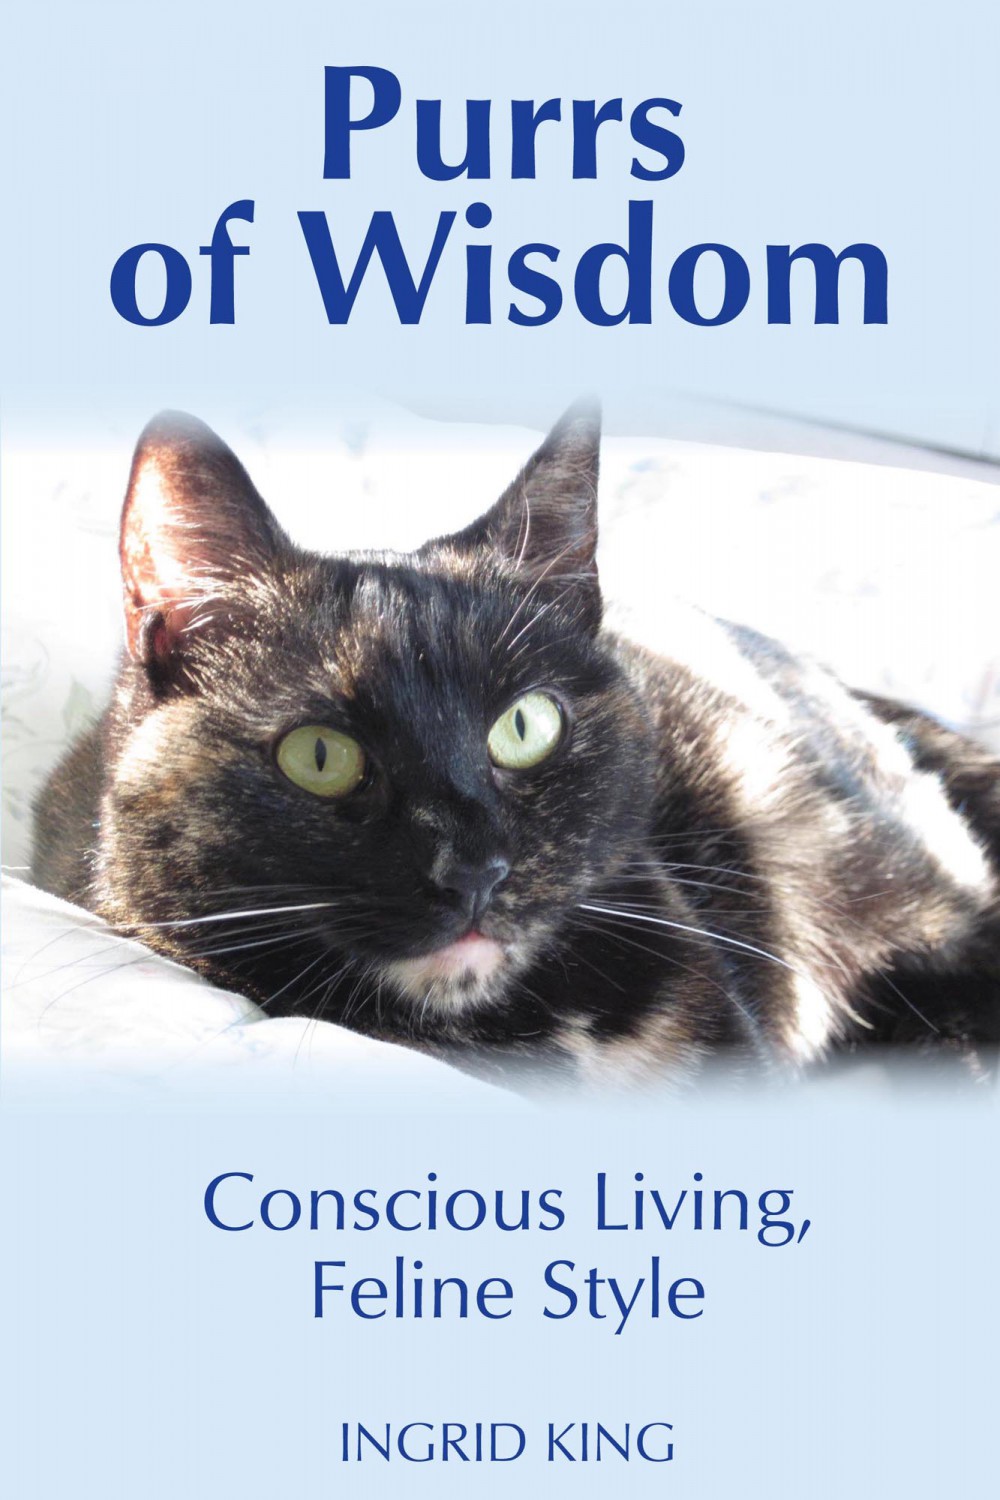 Cover for "Purrs of Wisdom" by Ingrid King